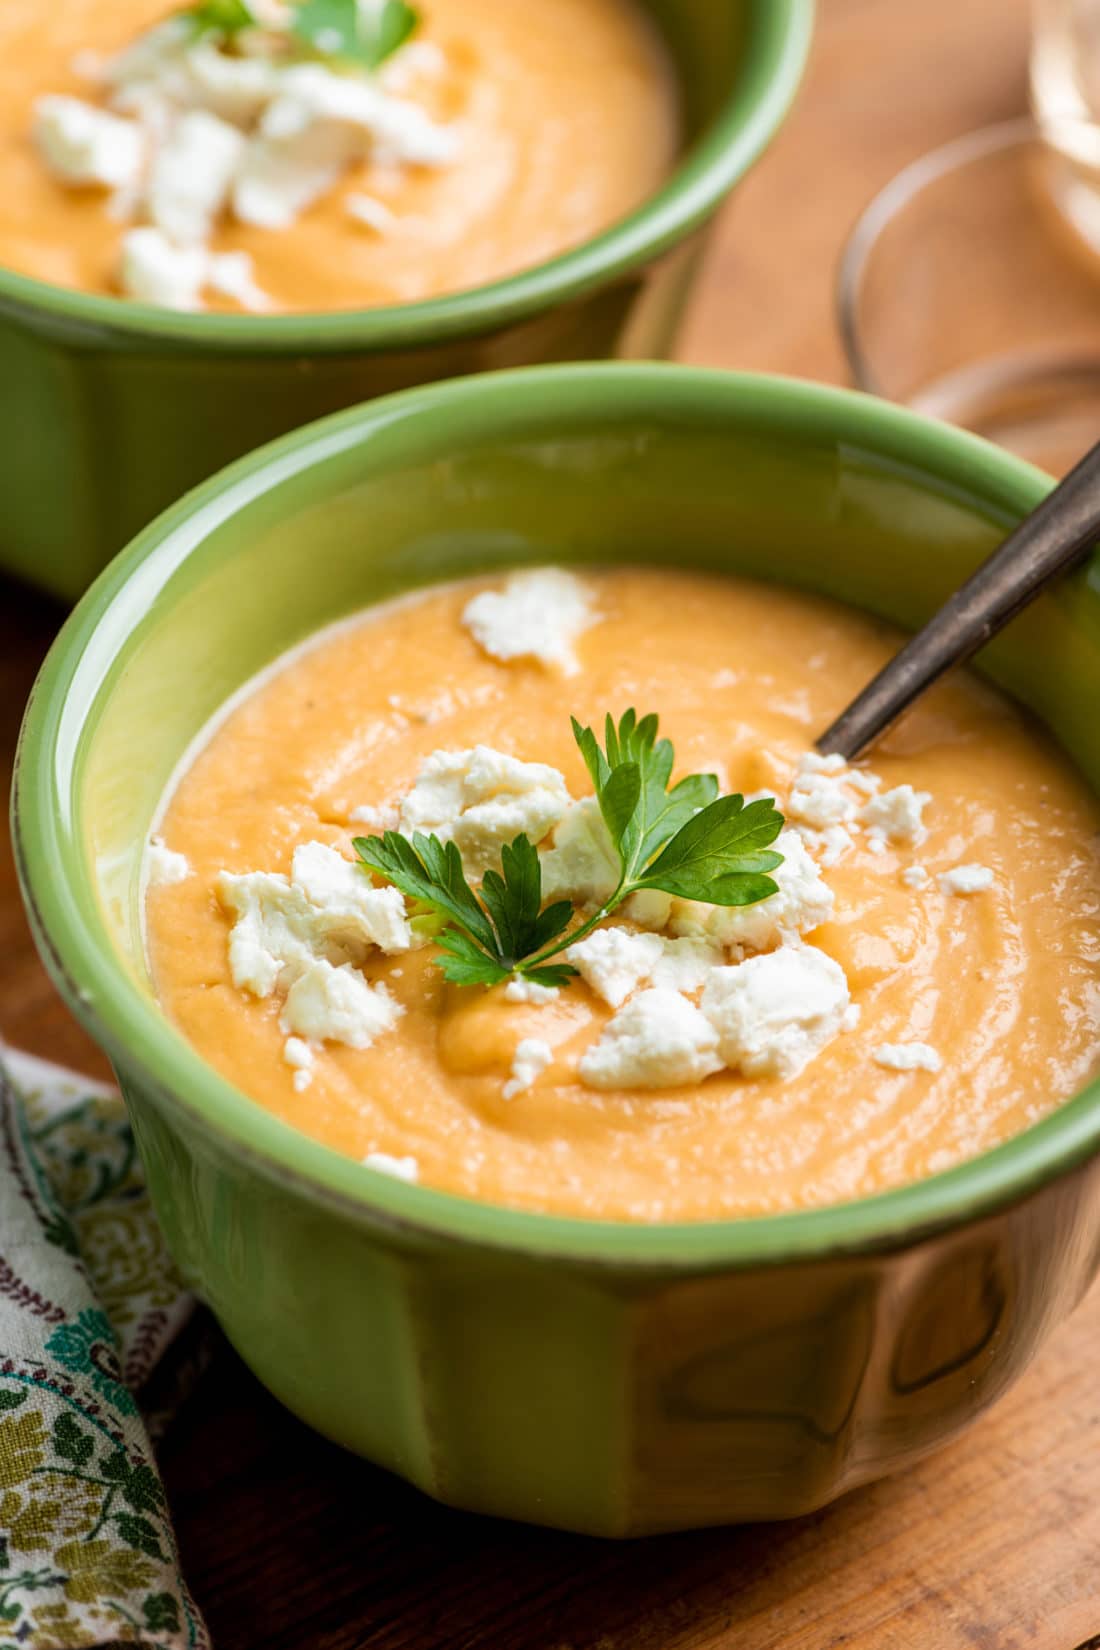 Spoon in a green bowl of Creamy Rutabaga, Carrot and Parsnip Soup.